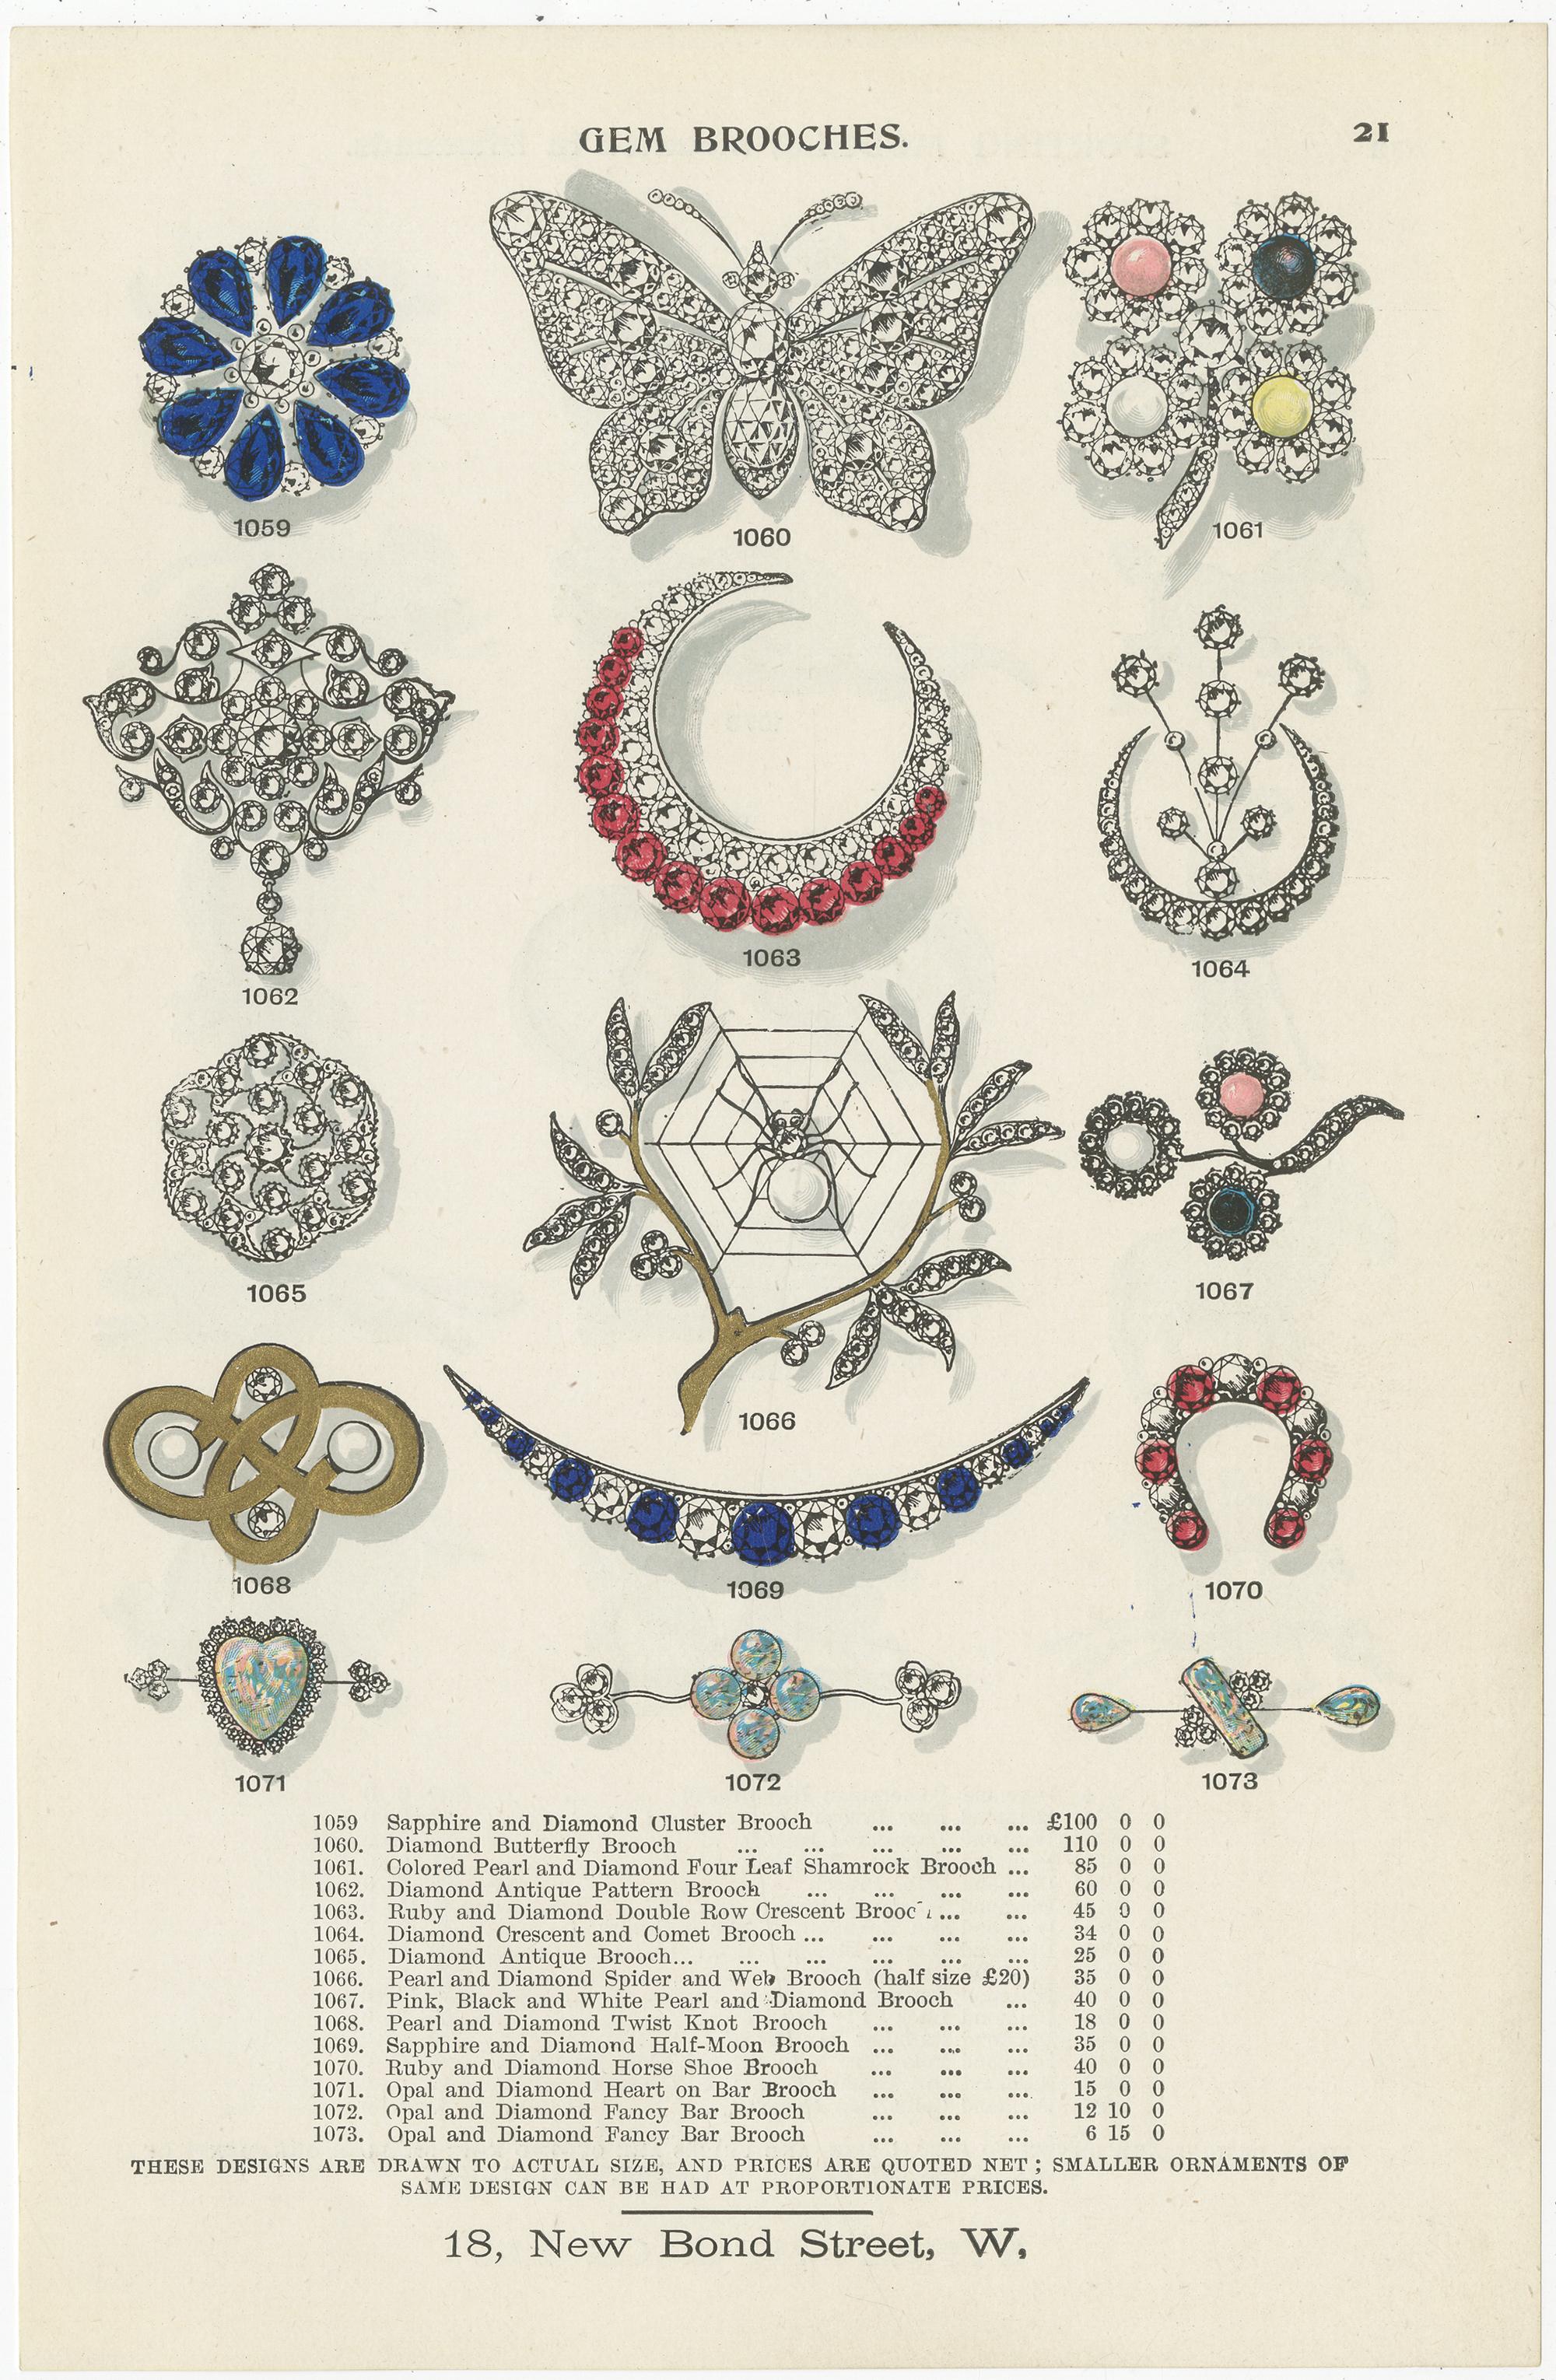 Set of two antique prints titled 'Gem Brooches'. Two original chromolithographic plates of gem brooches. These prints originate from 'Gems', a catalog containing fascinating essays on 31 individual gem stones, as well as on heraldry, and the